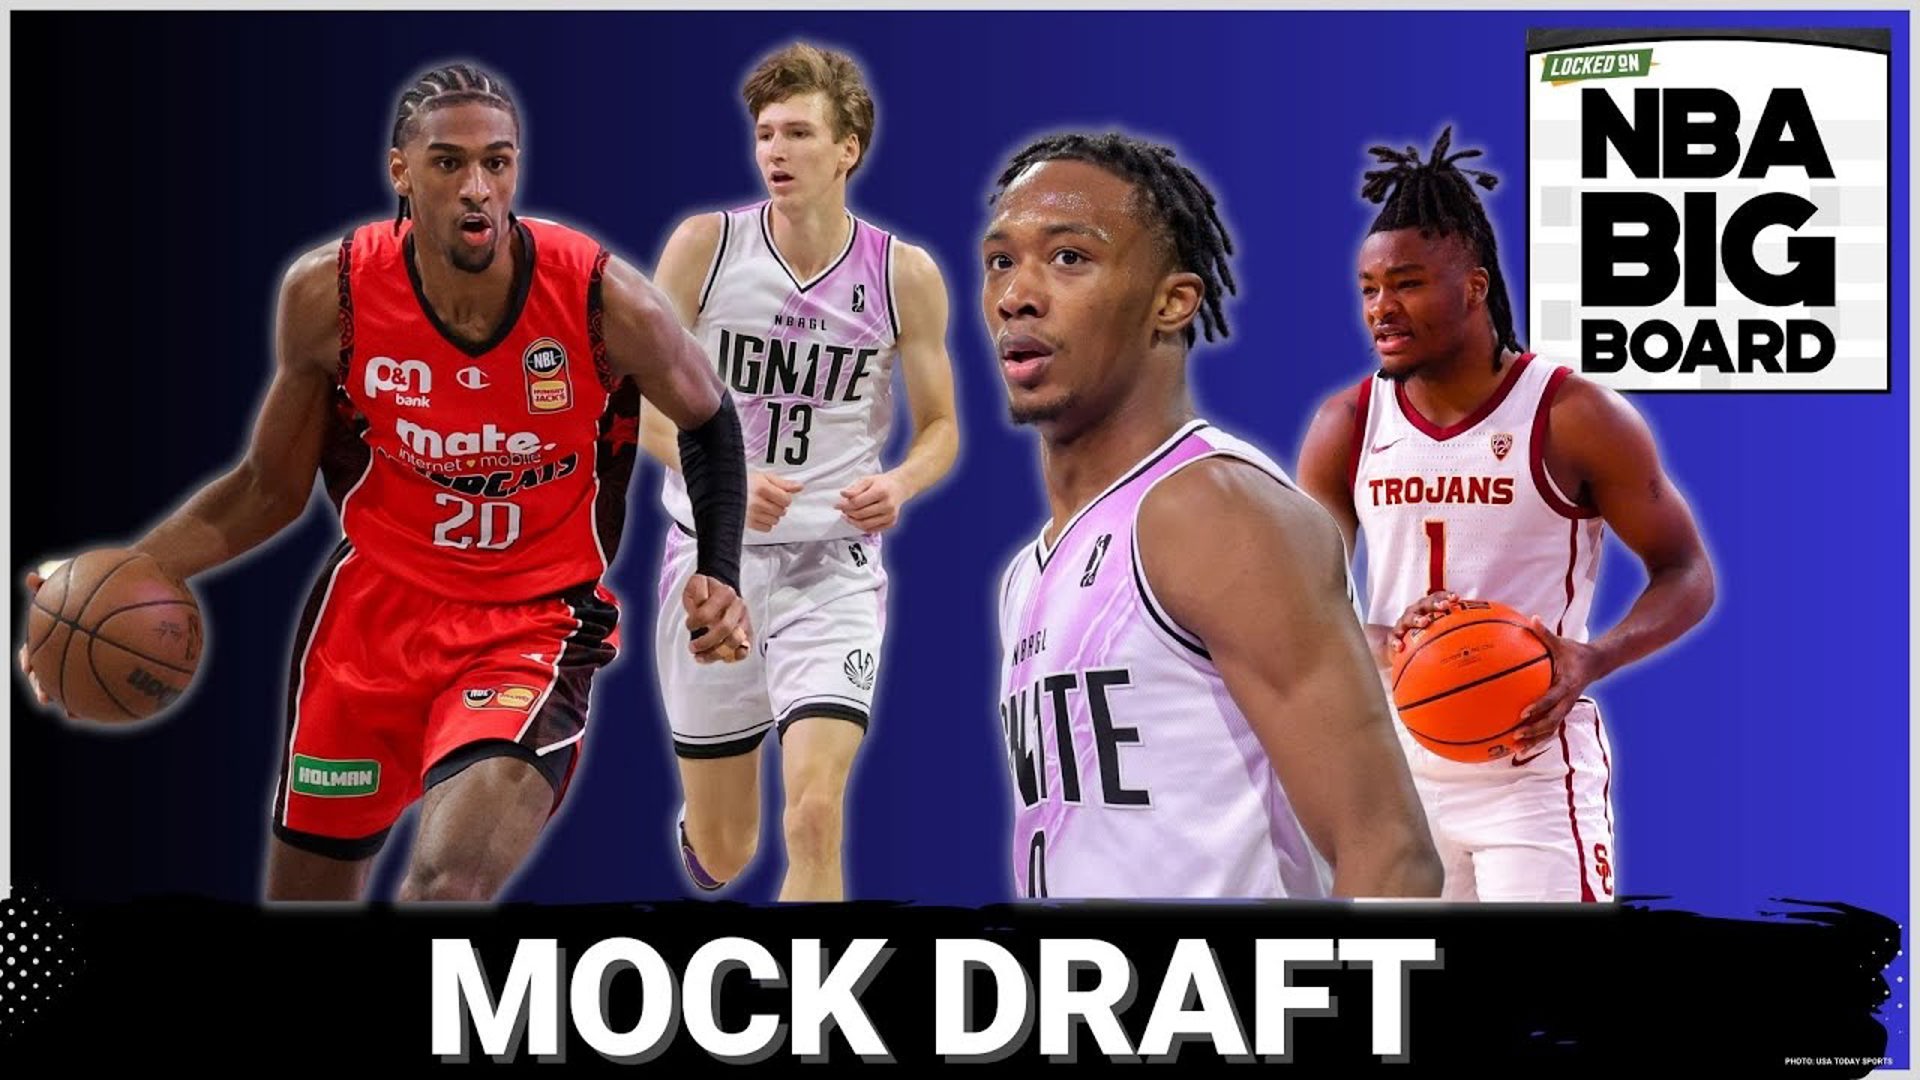 NBA Draft Analysts Leif Thulin and James Barlowe alternate picks and draft the NBA Lottery as they would as if they were in the NBA GM's shoes.